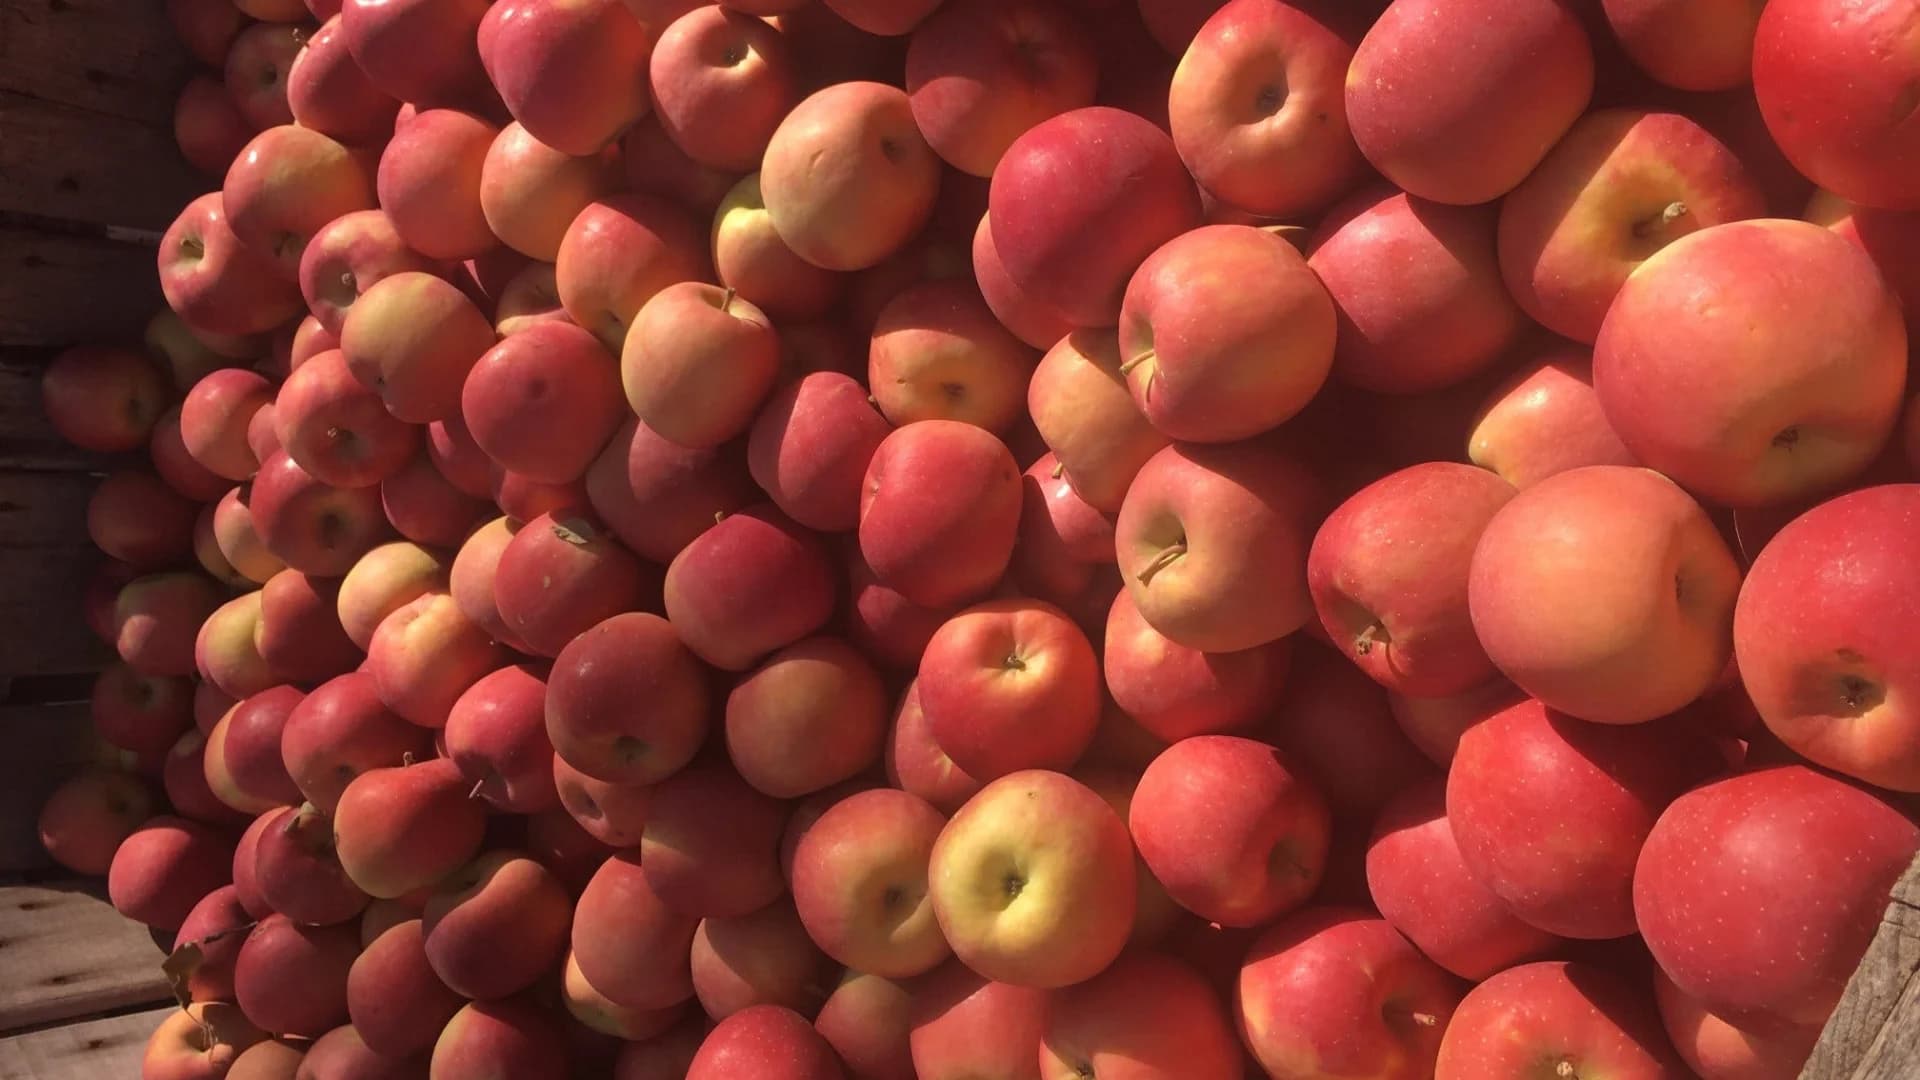 Photos: Apples, cider and pies at Jericho Cider Mill